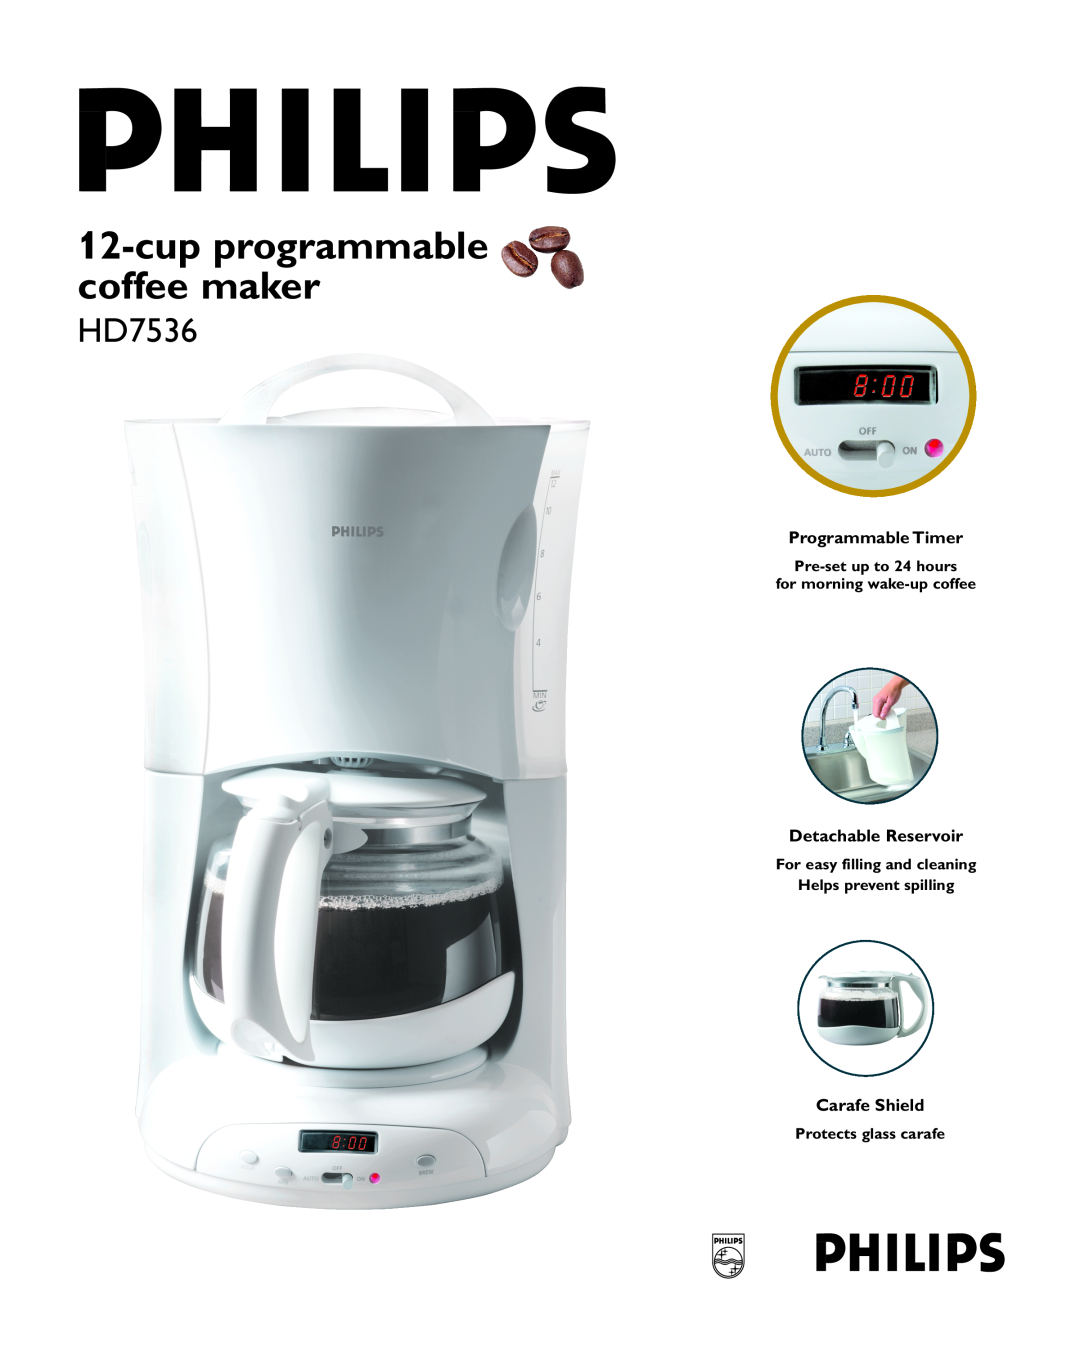 Philips HD7536 manual cup programmable coffee maker, Pre-set up to 24 hours for morning wake-up coffee, Programmable Timer 